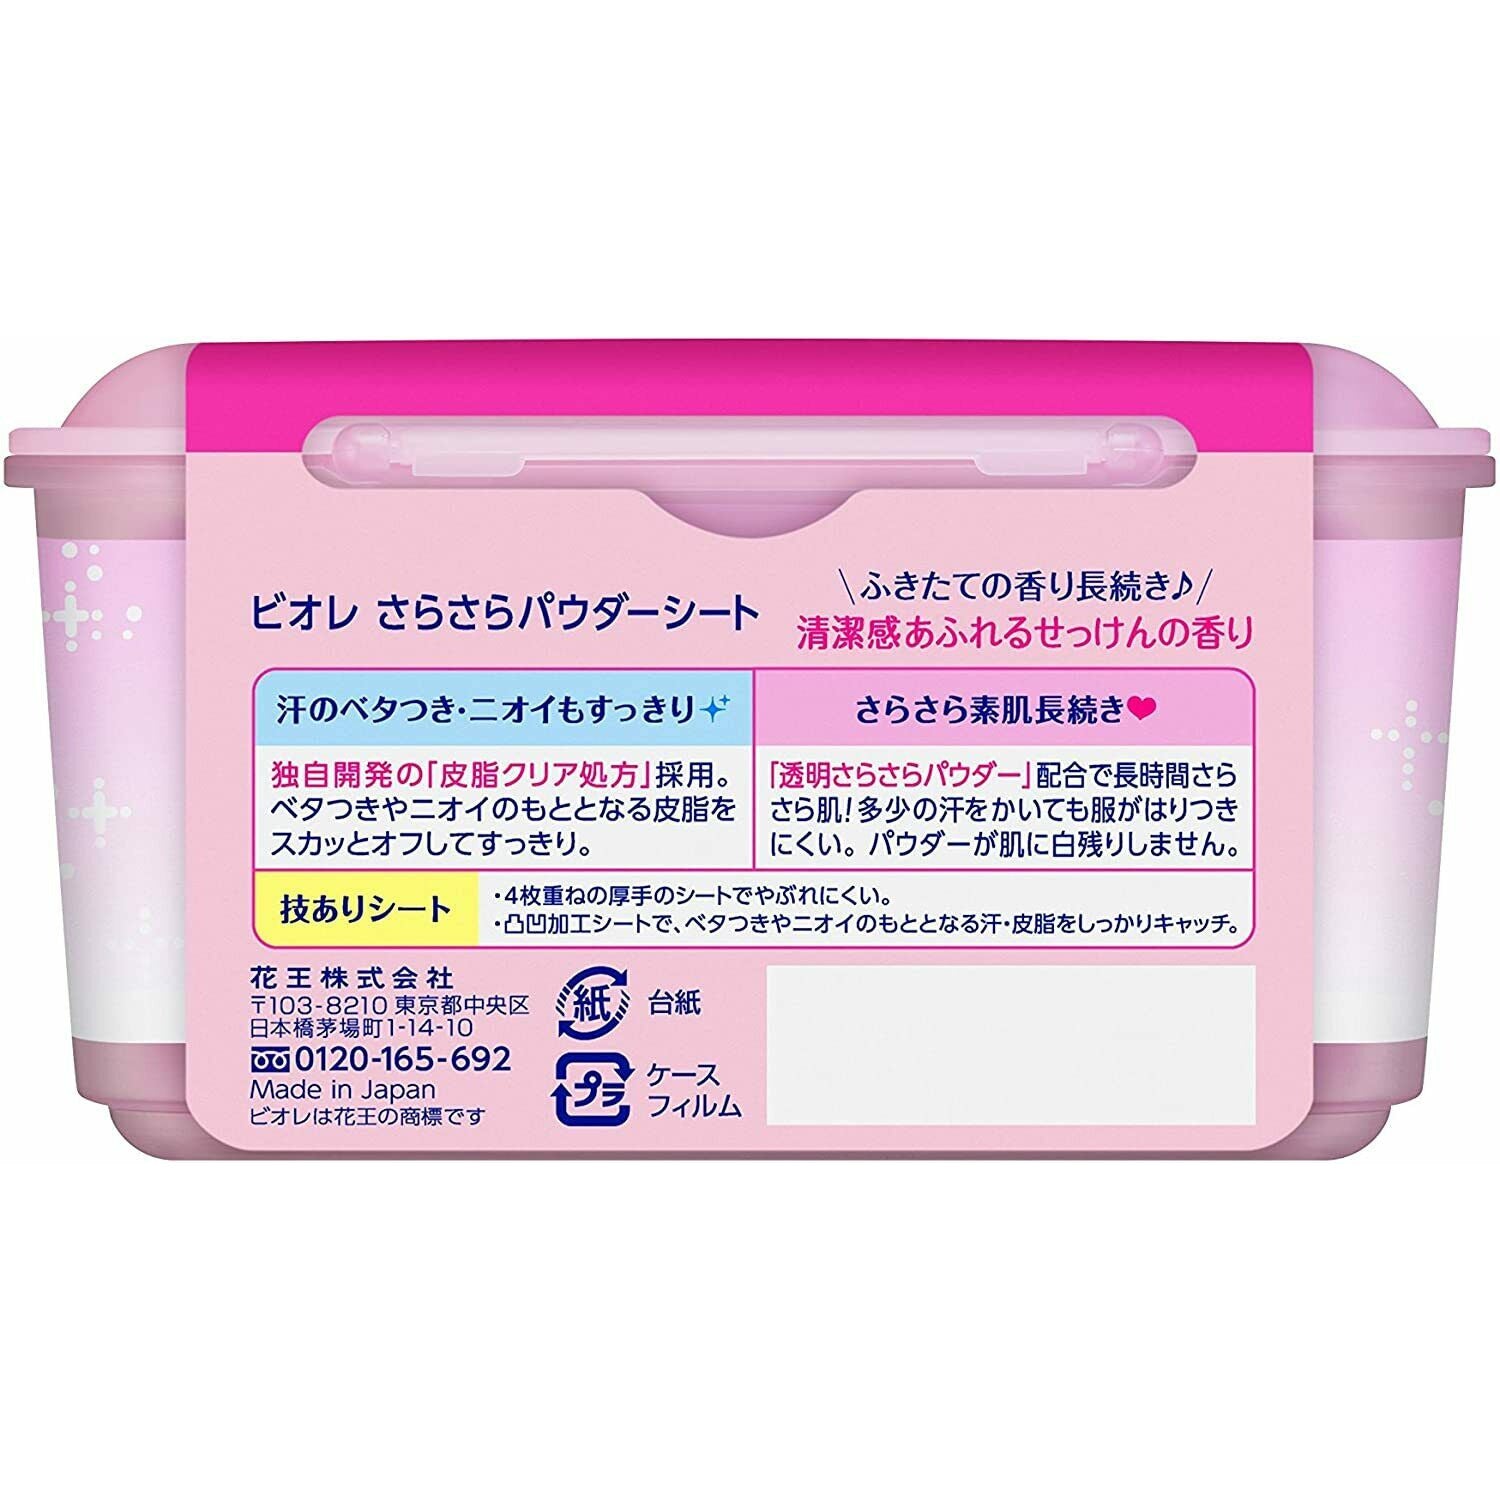 kao Biore Smooth Powder Sheet Soap Fragrance 36 Sheets in Case Deotrant